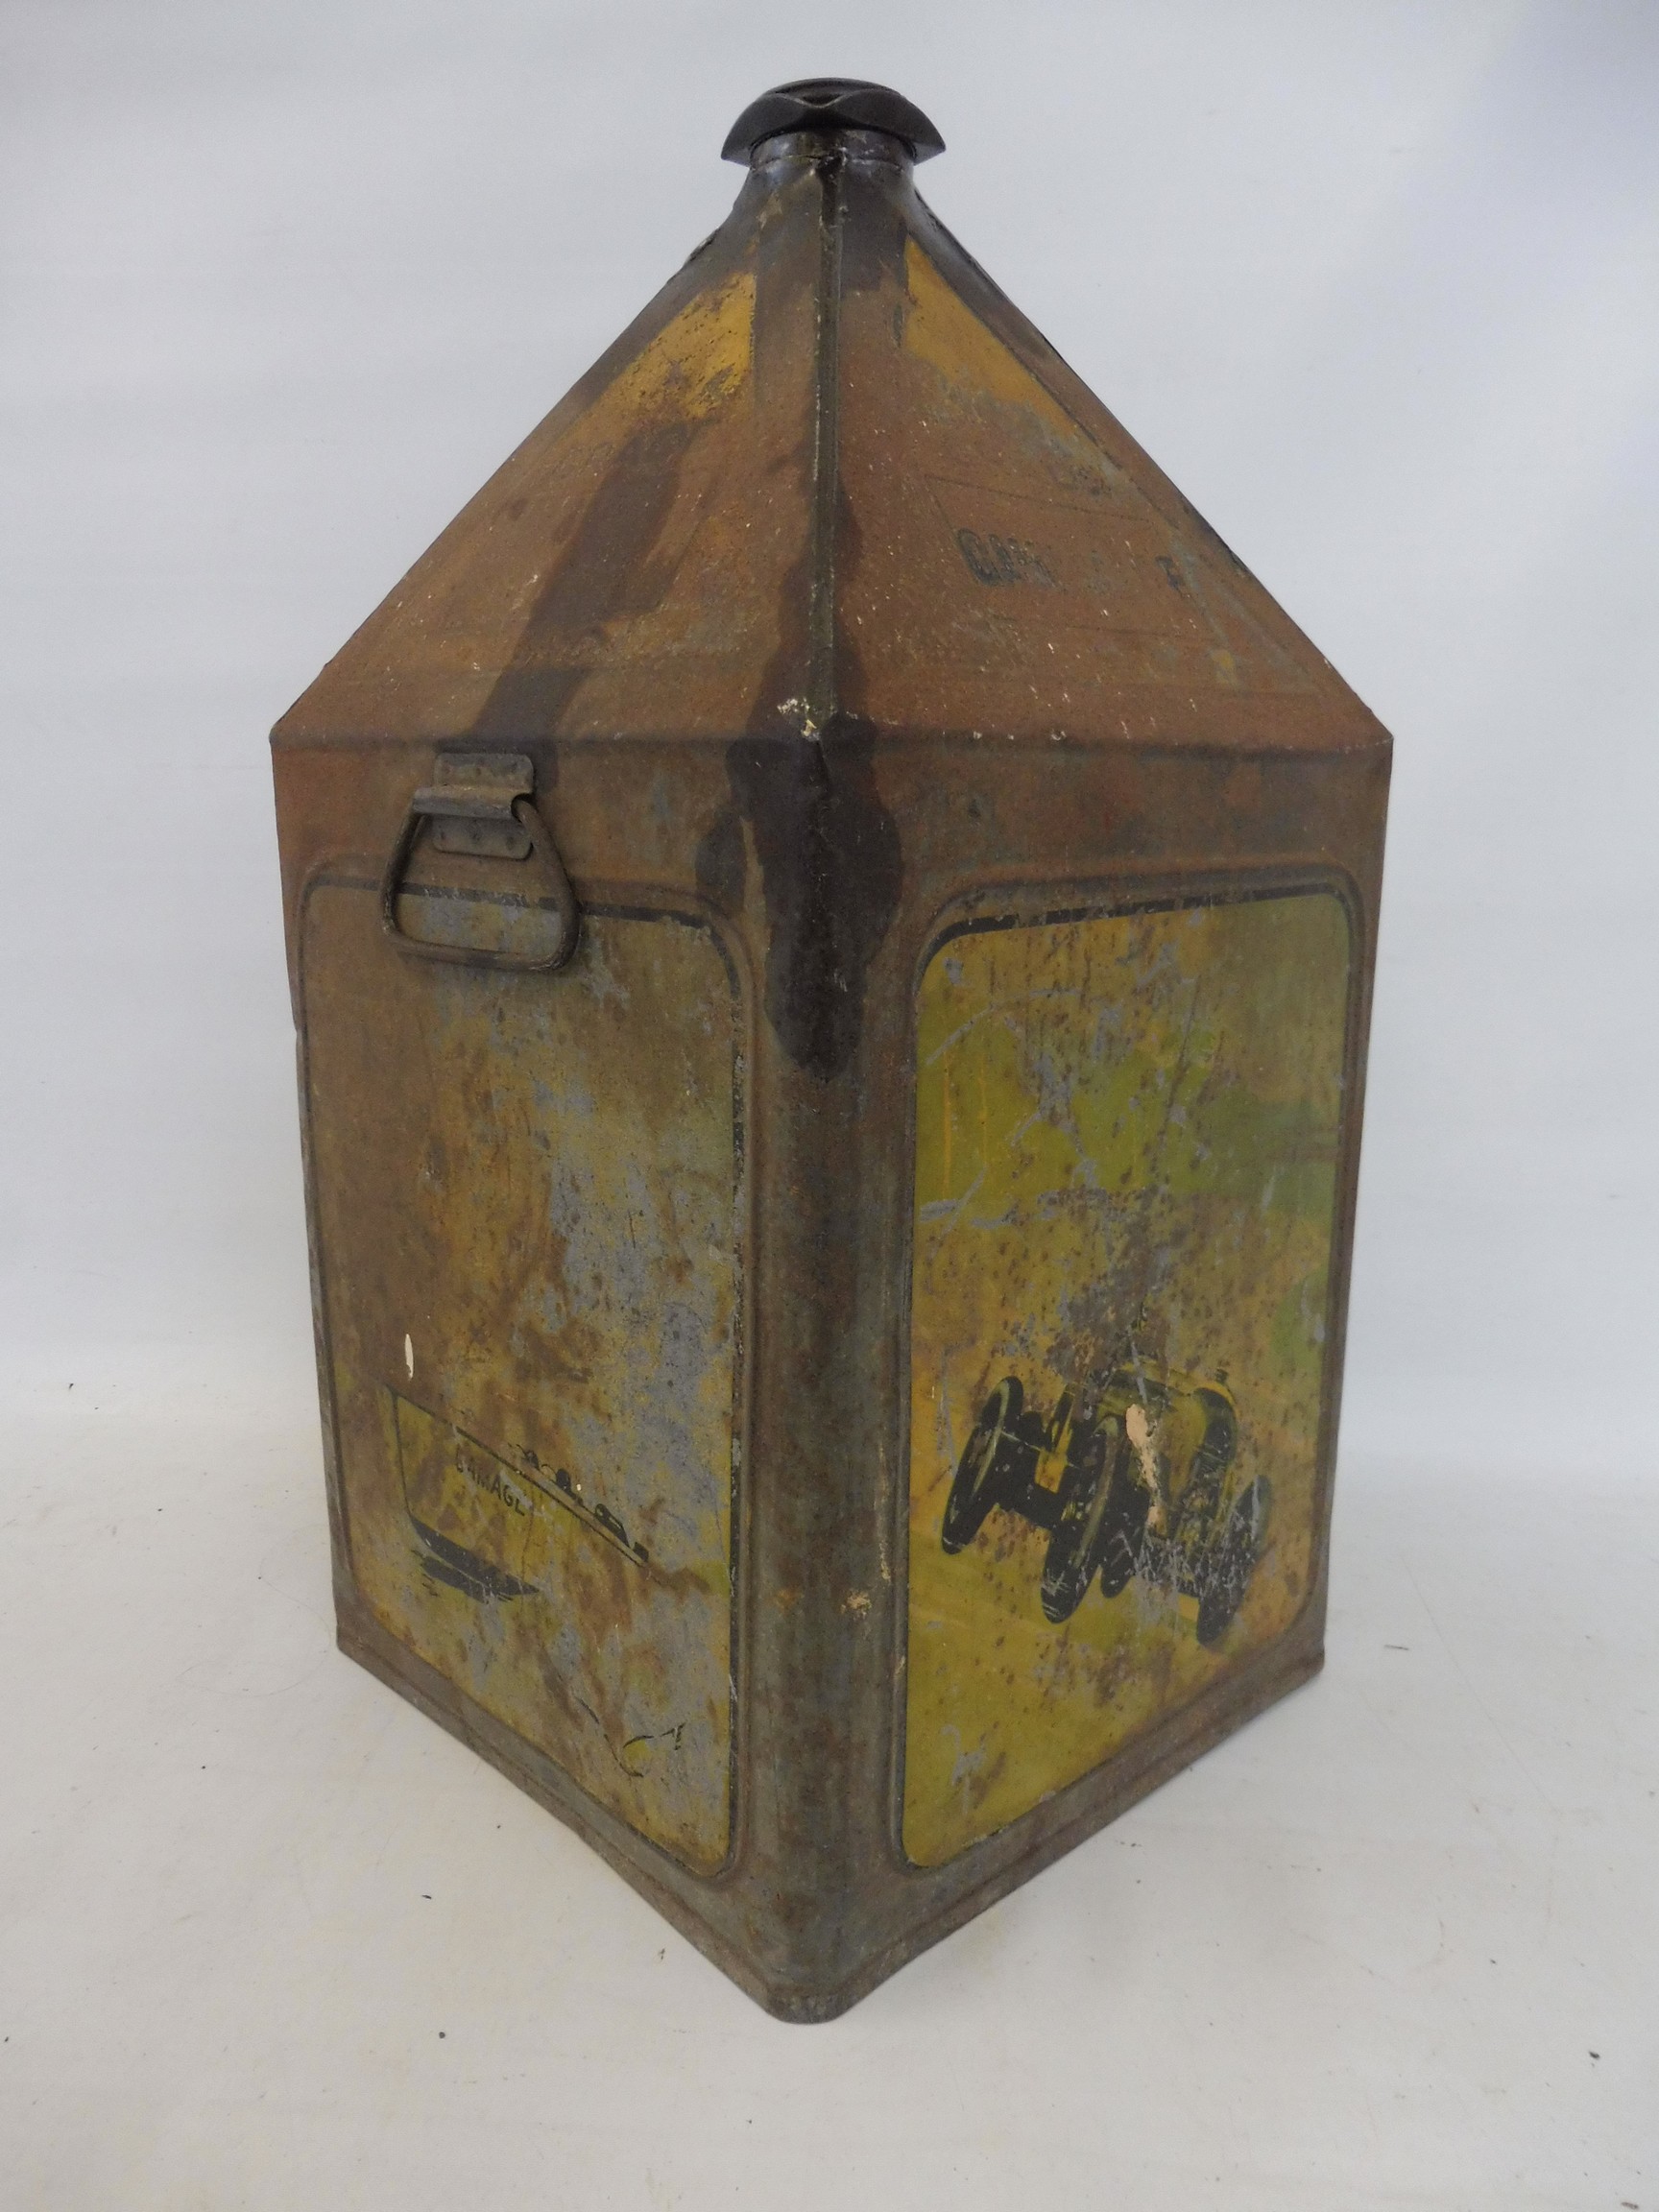 A Gamages five gallon pyramid can. - Image 2 of 4